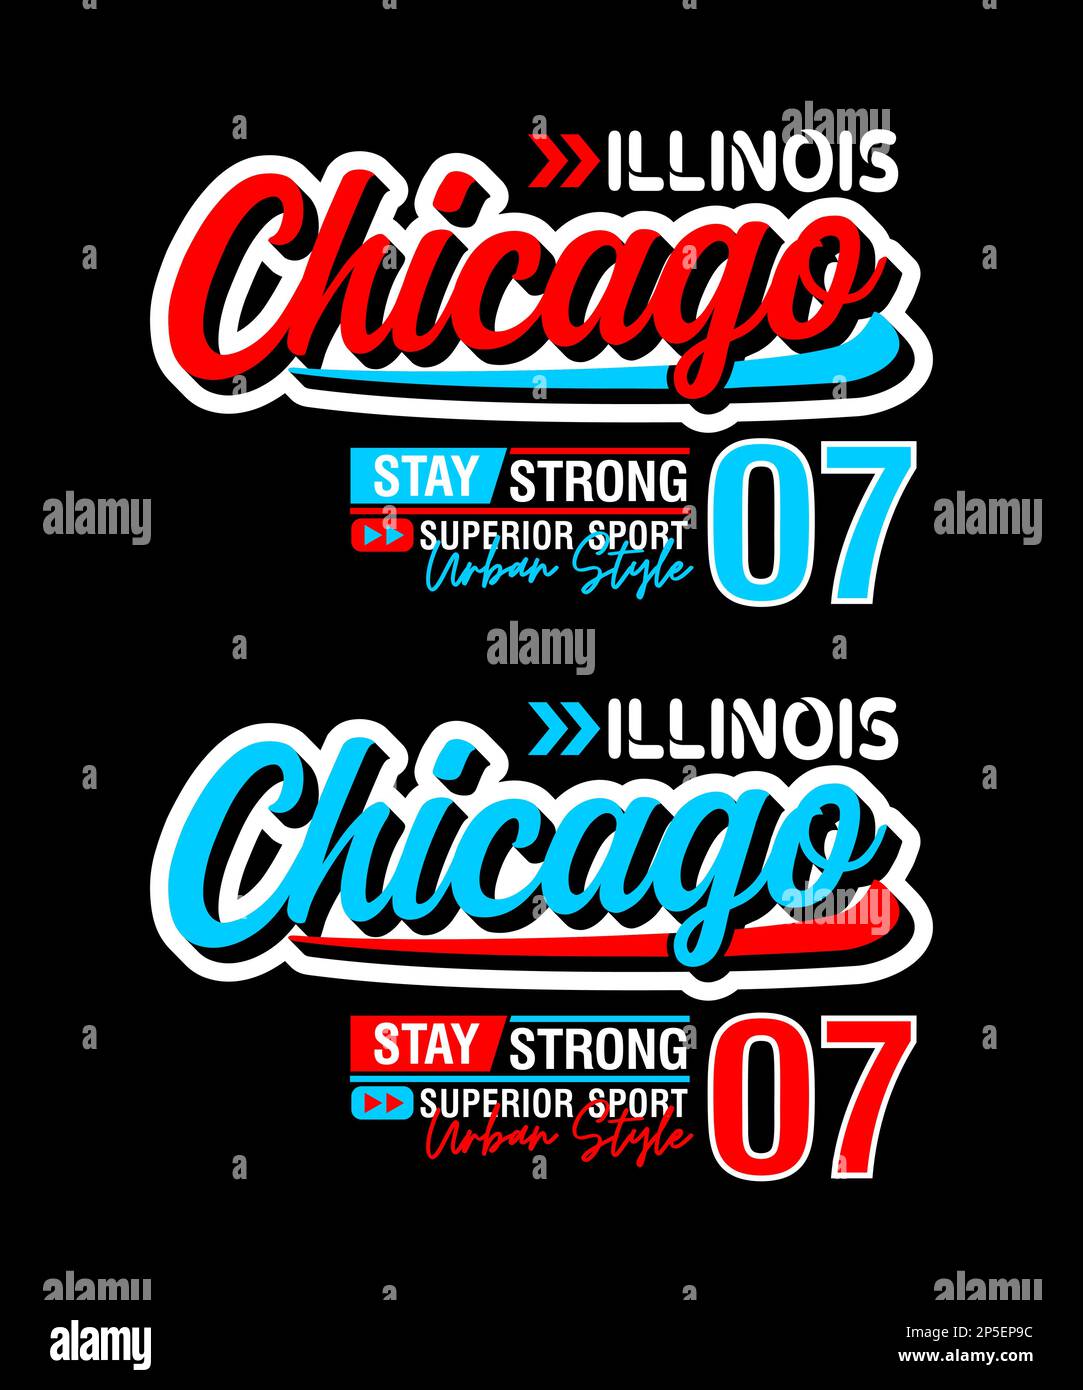 Illinois Chicago, design graphic for print on t shirts, labels, posters, and itc Stock Vector